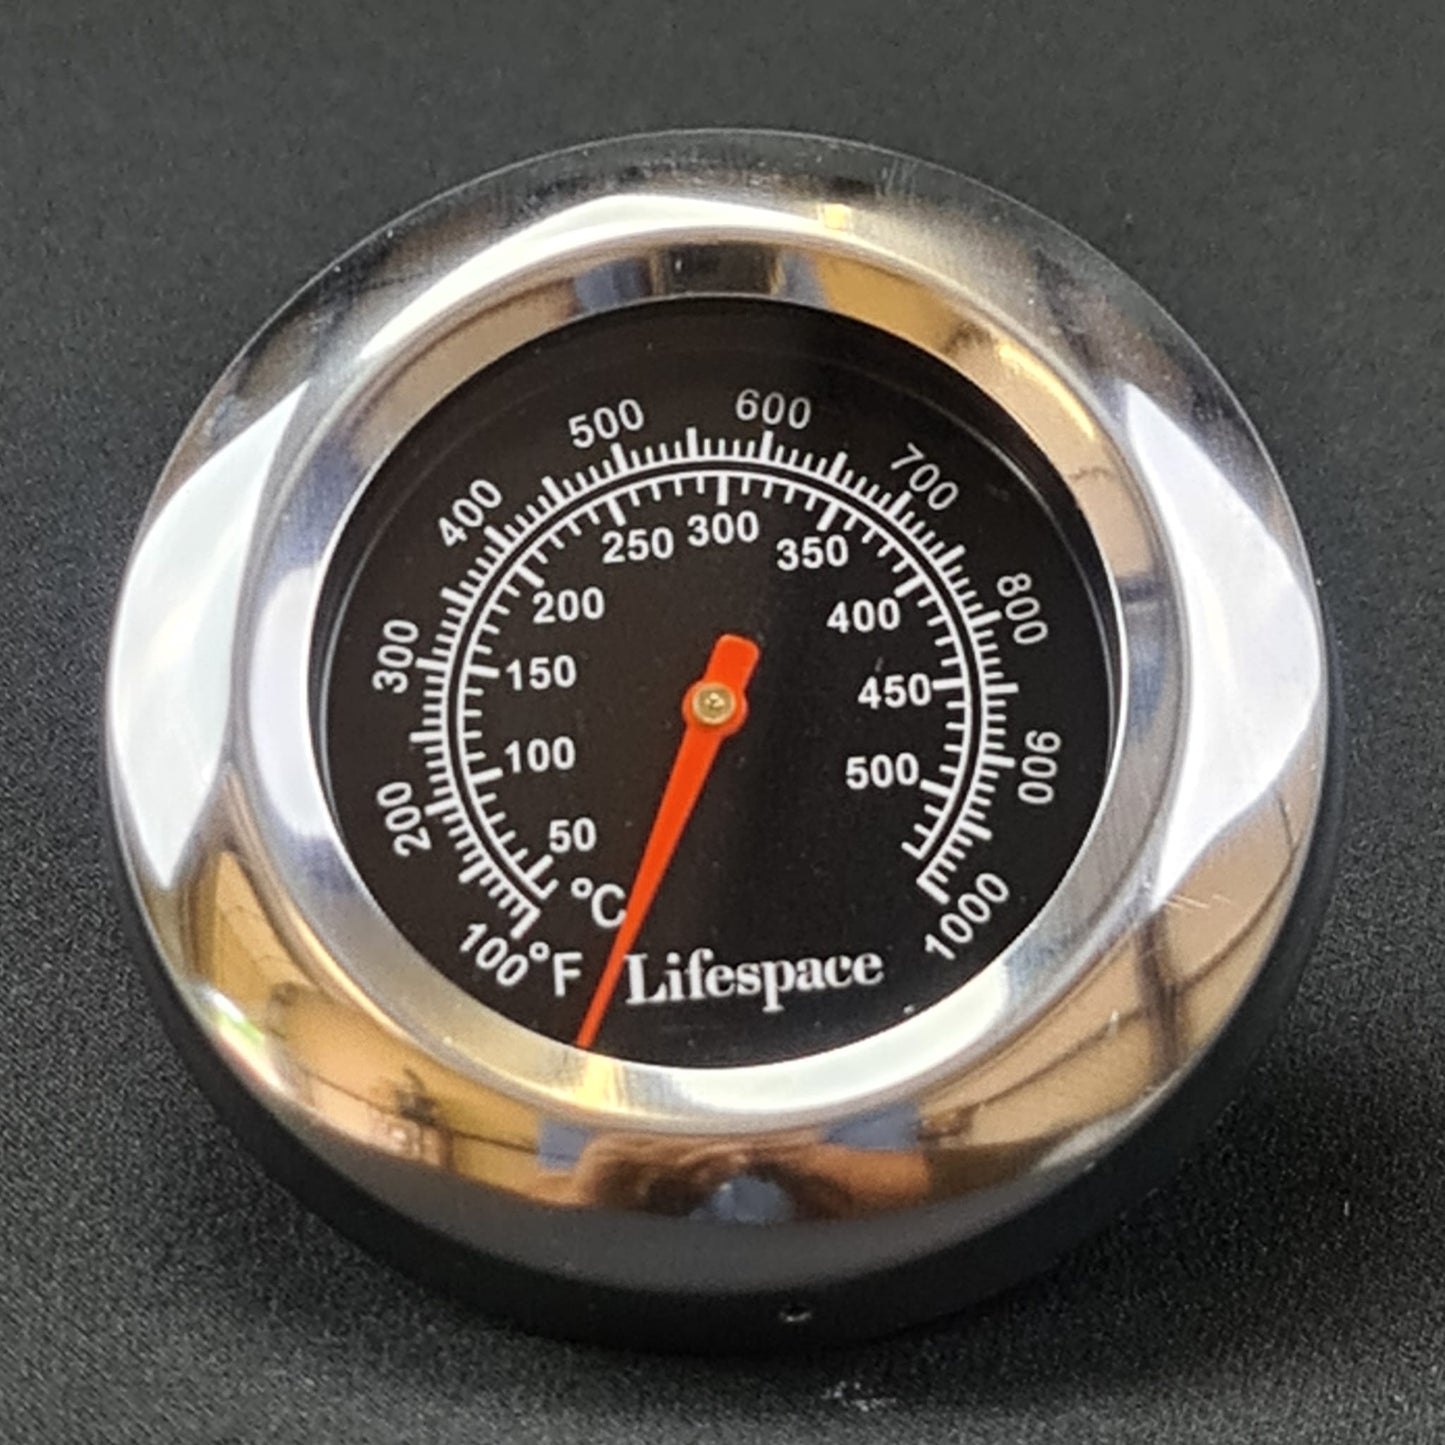 Lifespace Universal Replacement Grill / Smoker Thermometer - Black Face